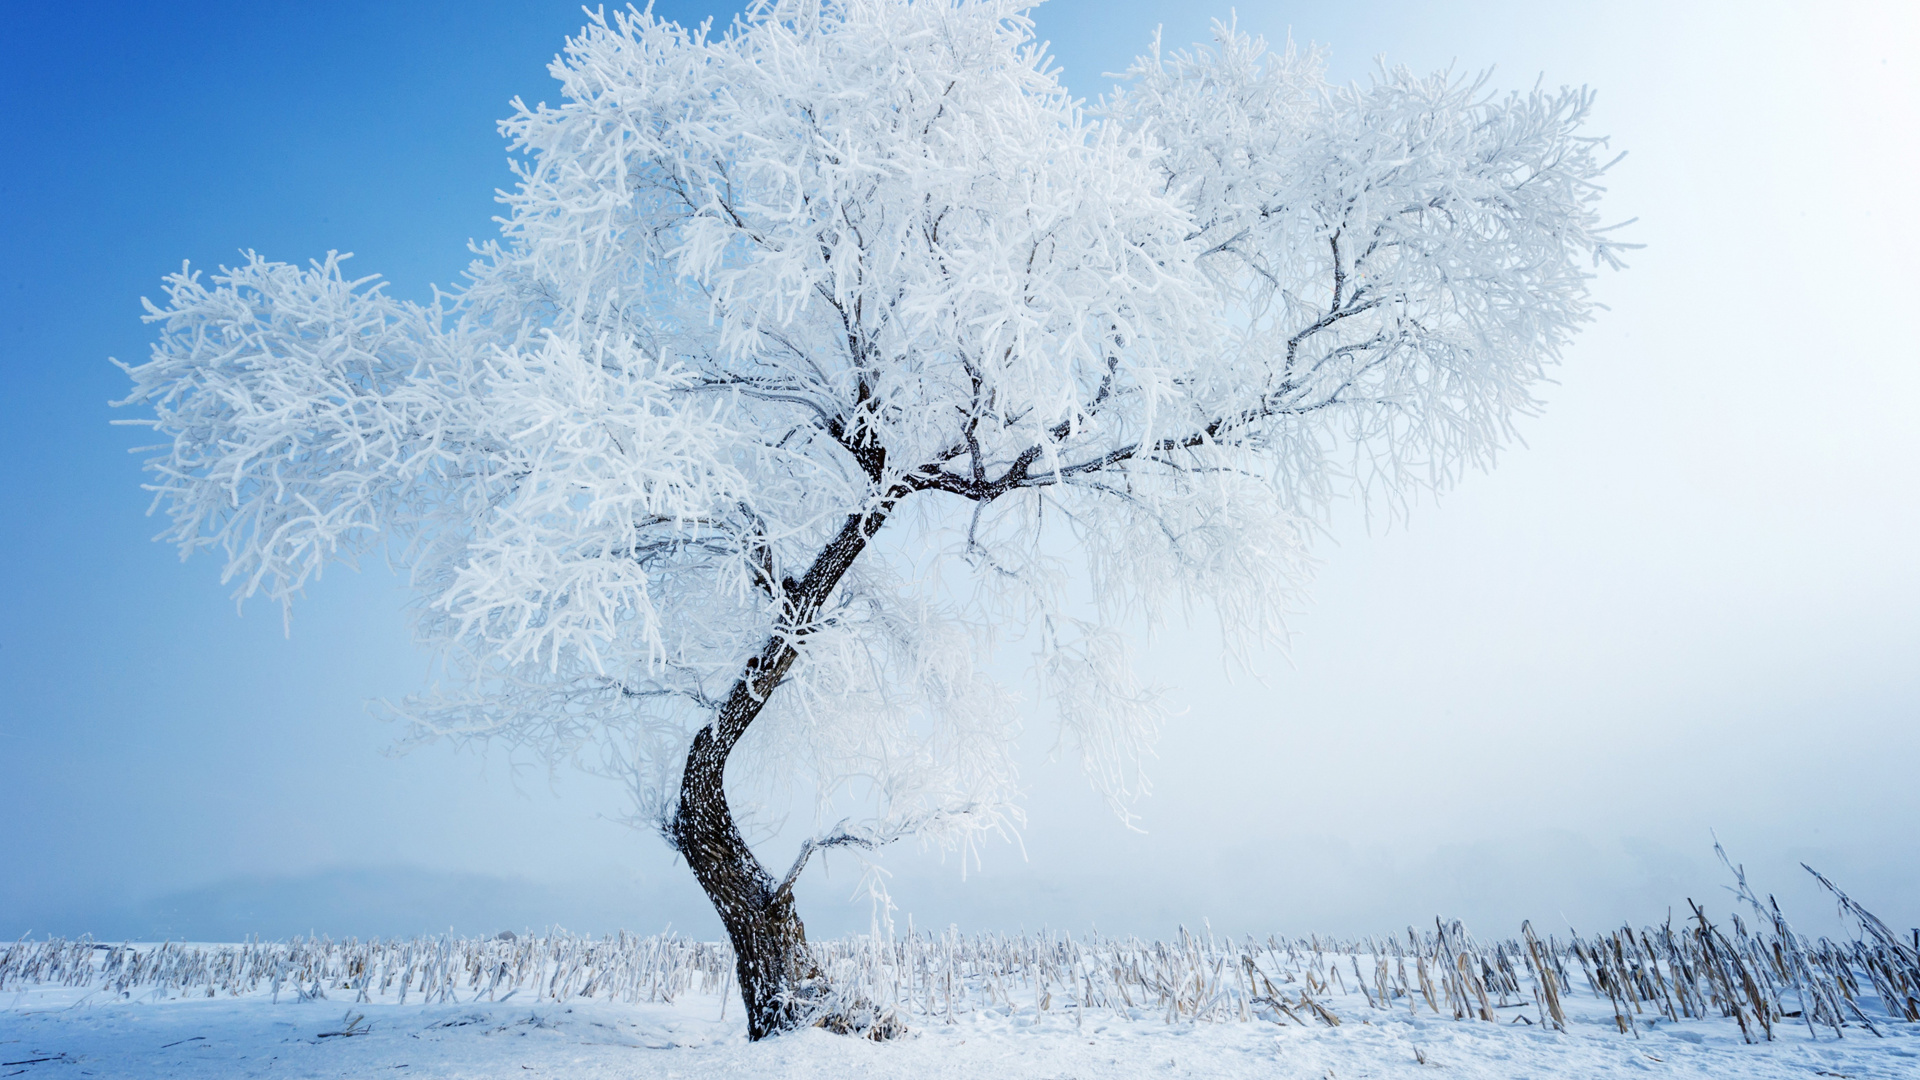 Snow Covered Bare Tree During Daytime. Wallpaper in 1920x1080 Resolution